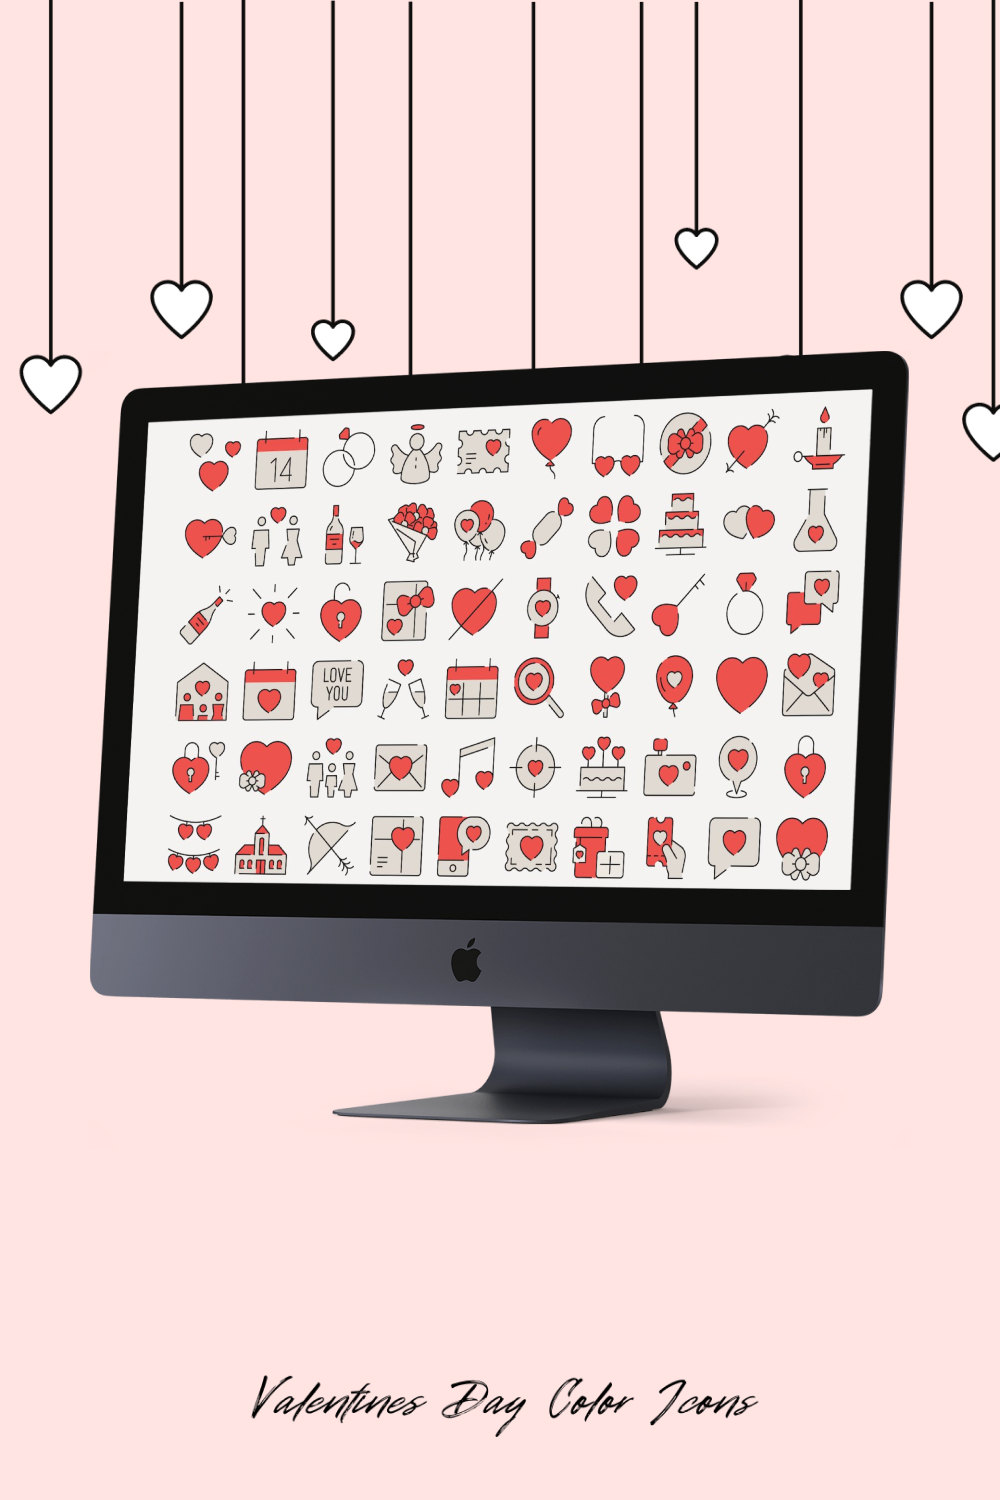 valentines day color icons 1 275